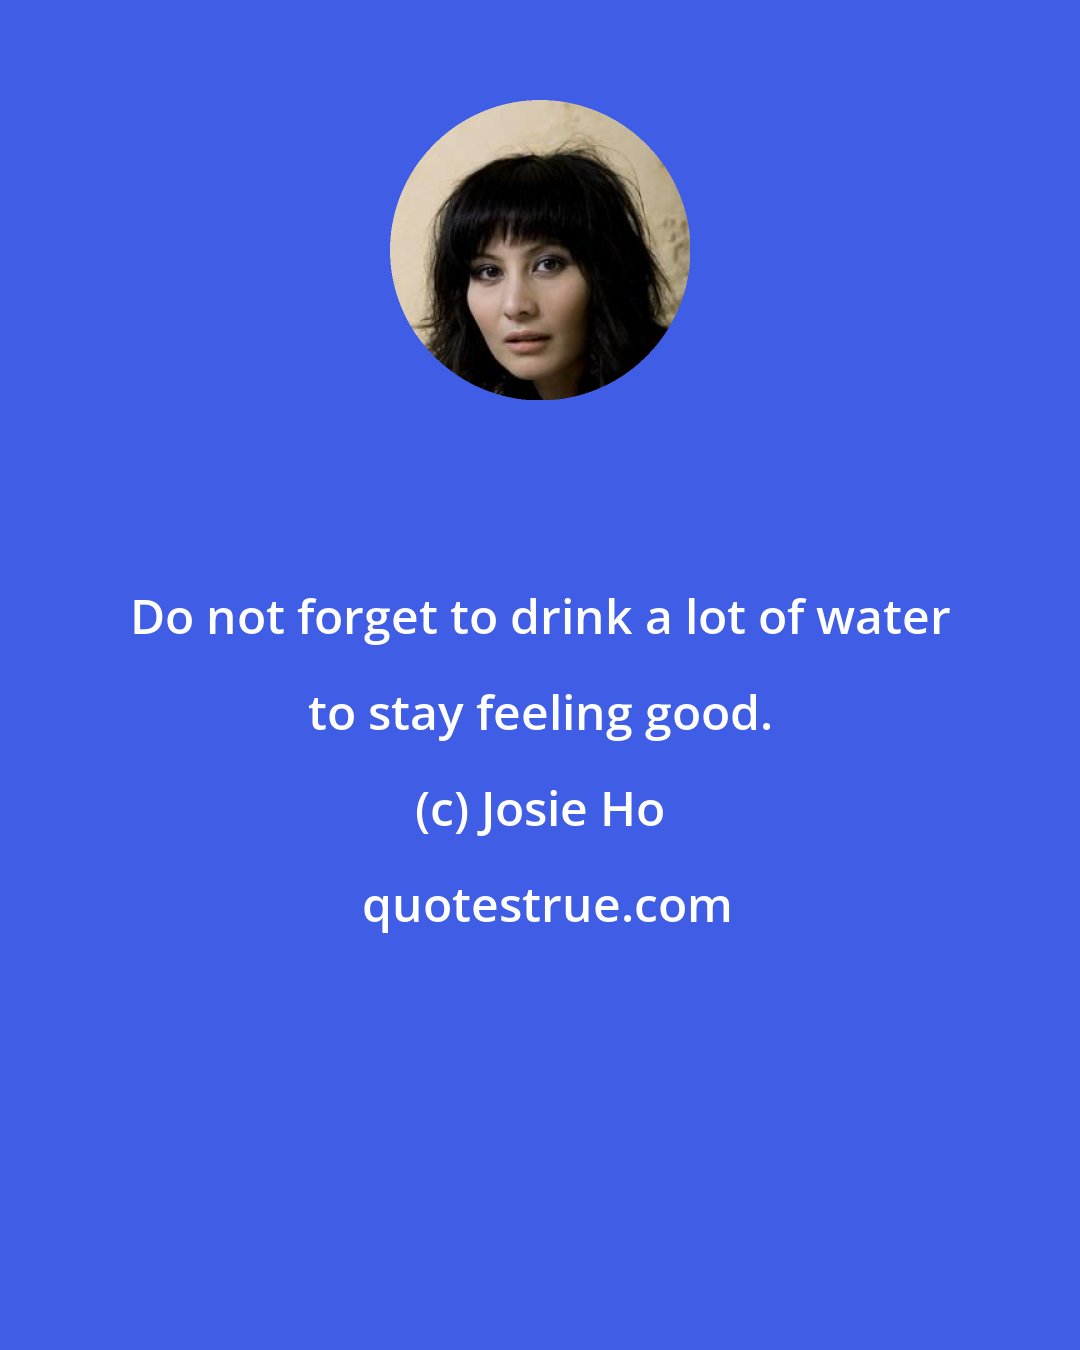 Josie Ho: Do not forget to drink a lot of water to stay feeling good.